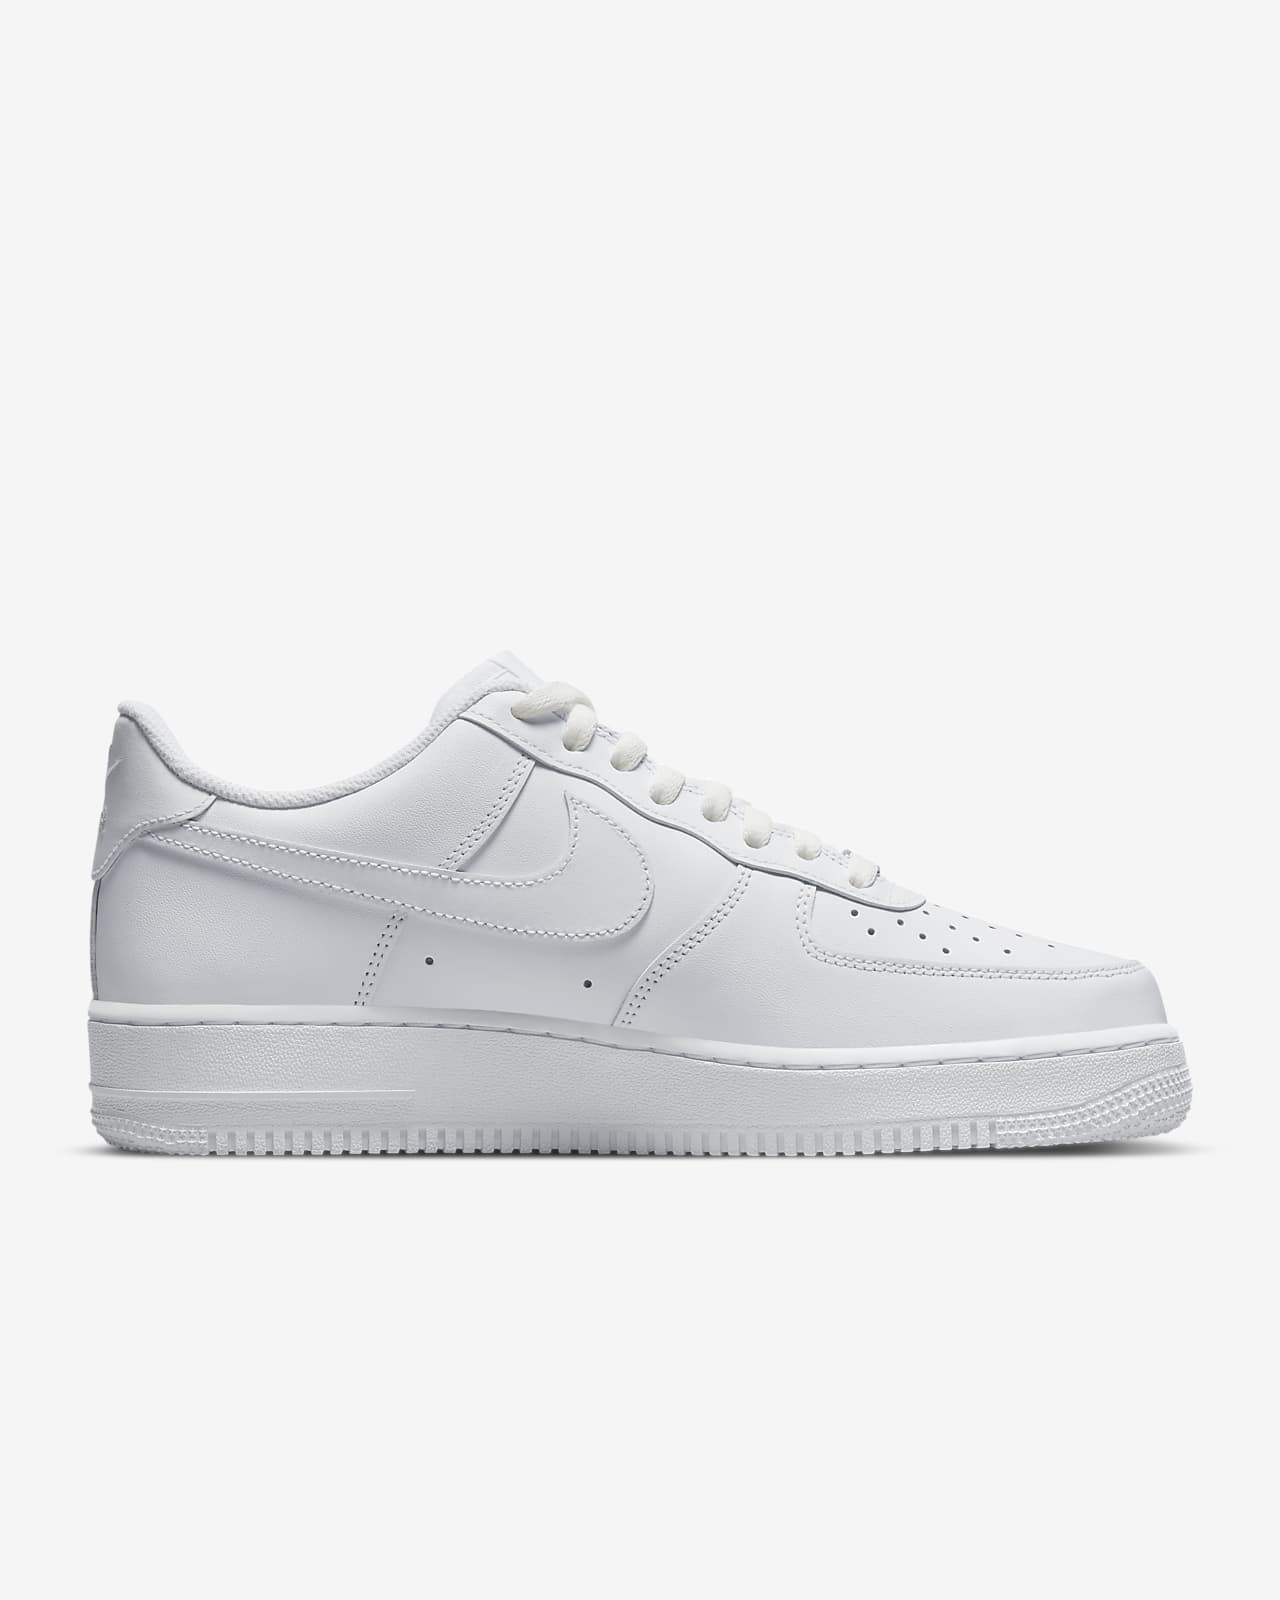 nike air force 1 '07 lv8 mens shoes size 10